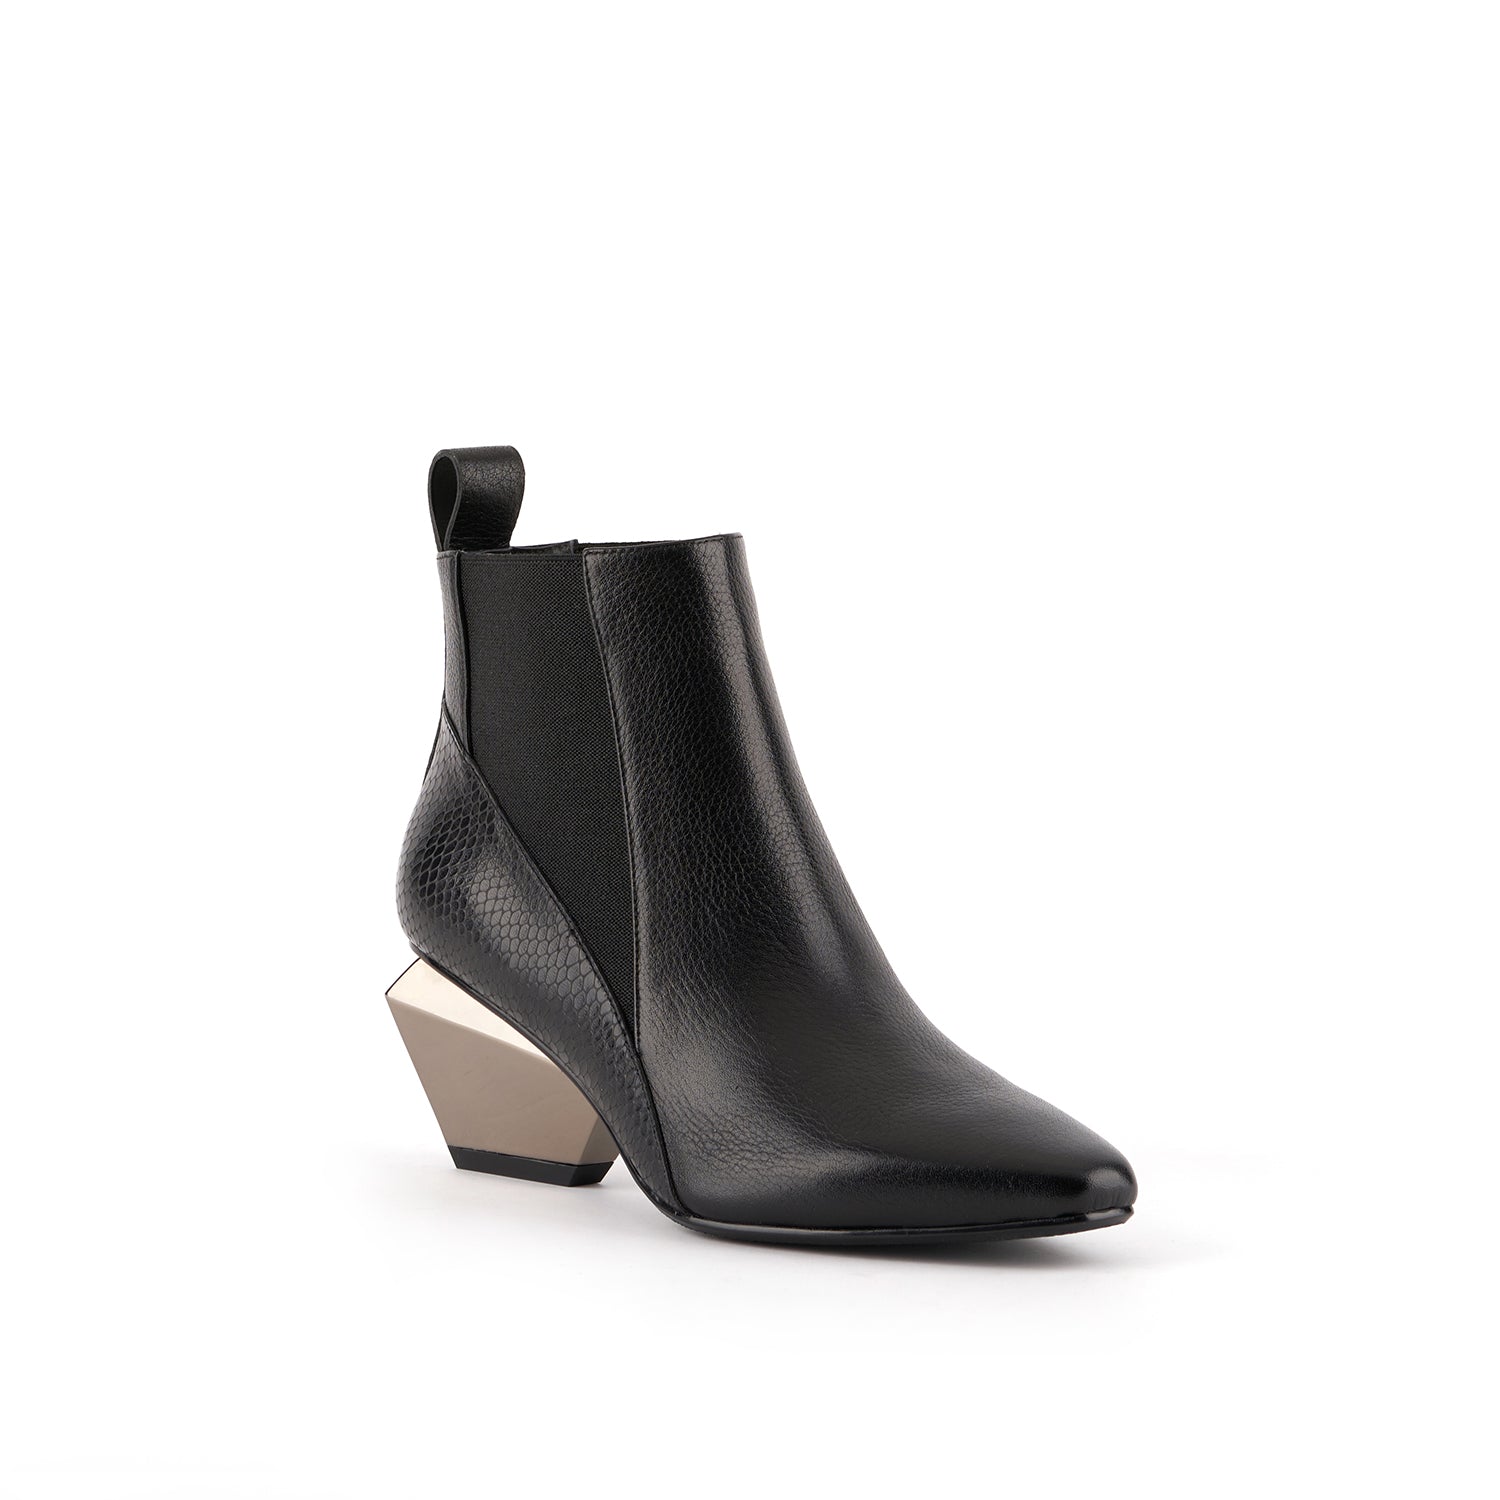 Outer  front side view of the united nude black jacky k bootie. This bootie is black with a chrome/brown metallic geometric heel. The boot has a pointed toe and and elastic gore on both sides of the shoe.